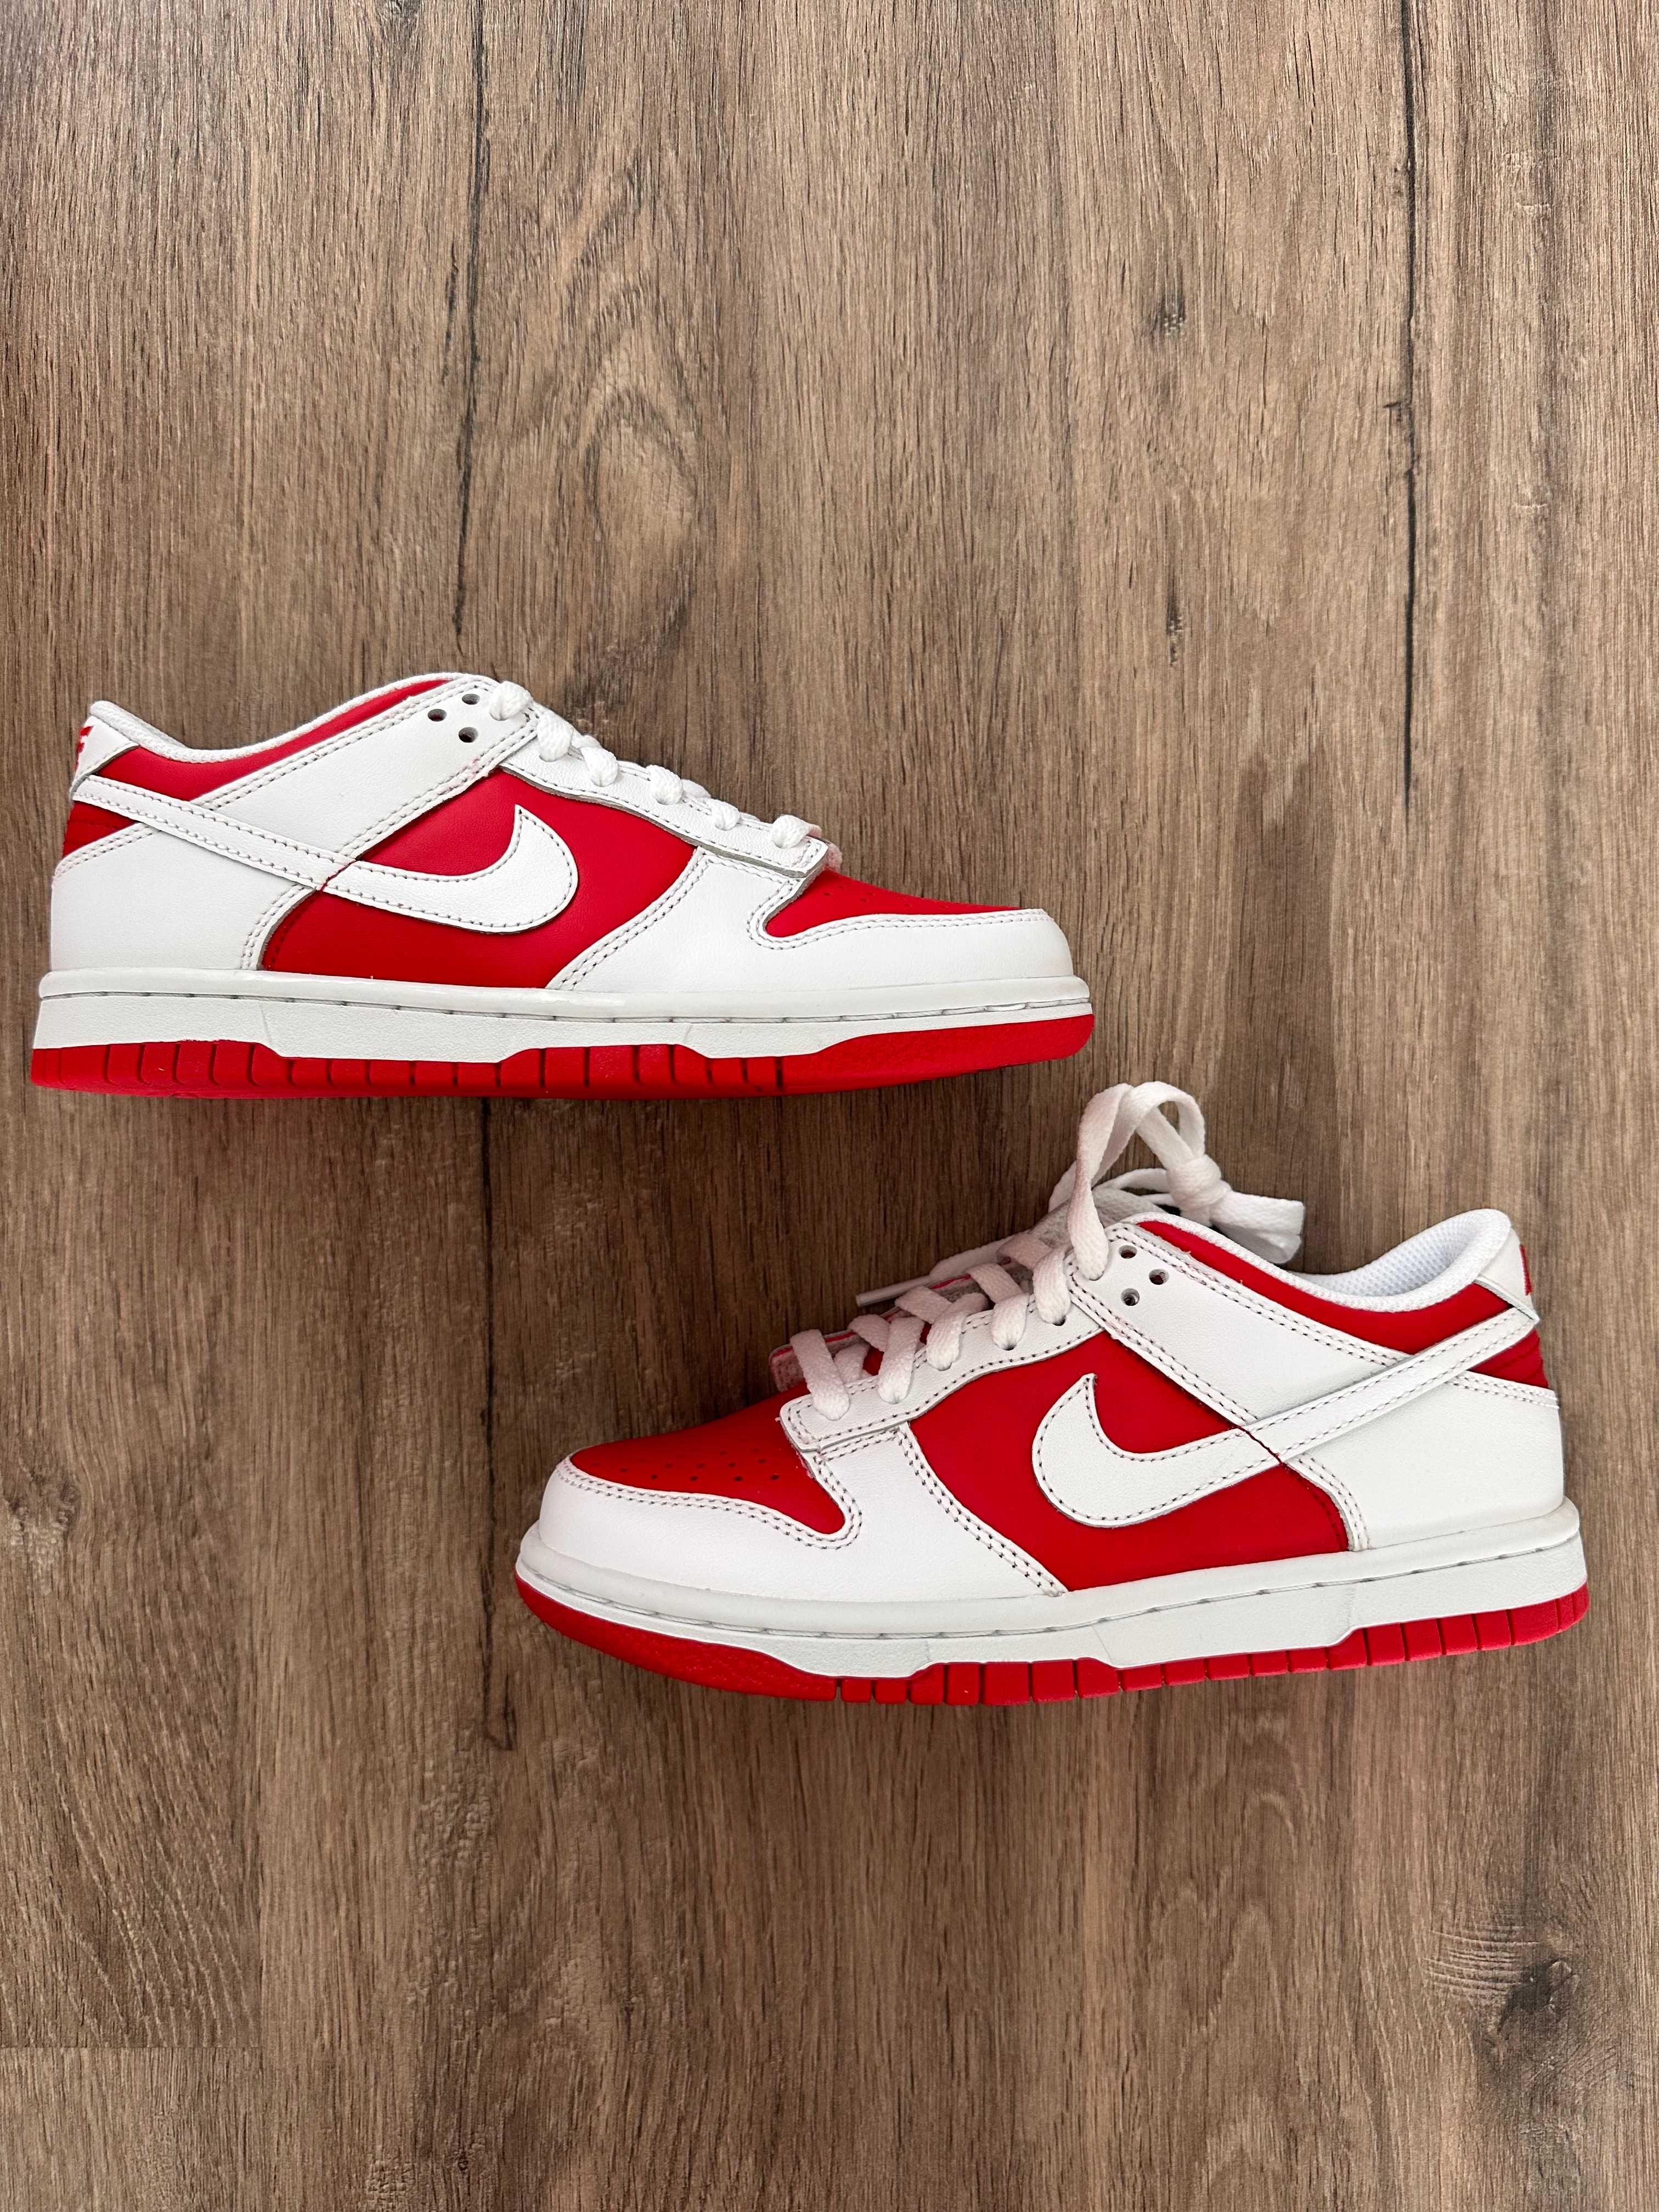 Nike Dunk Low Championship Red (2021) (GS) - 36